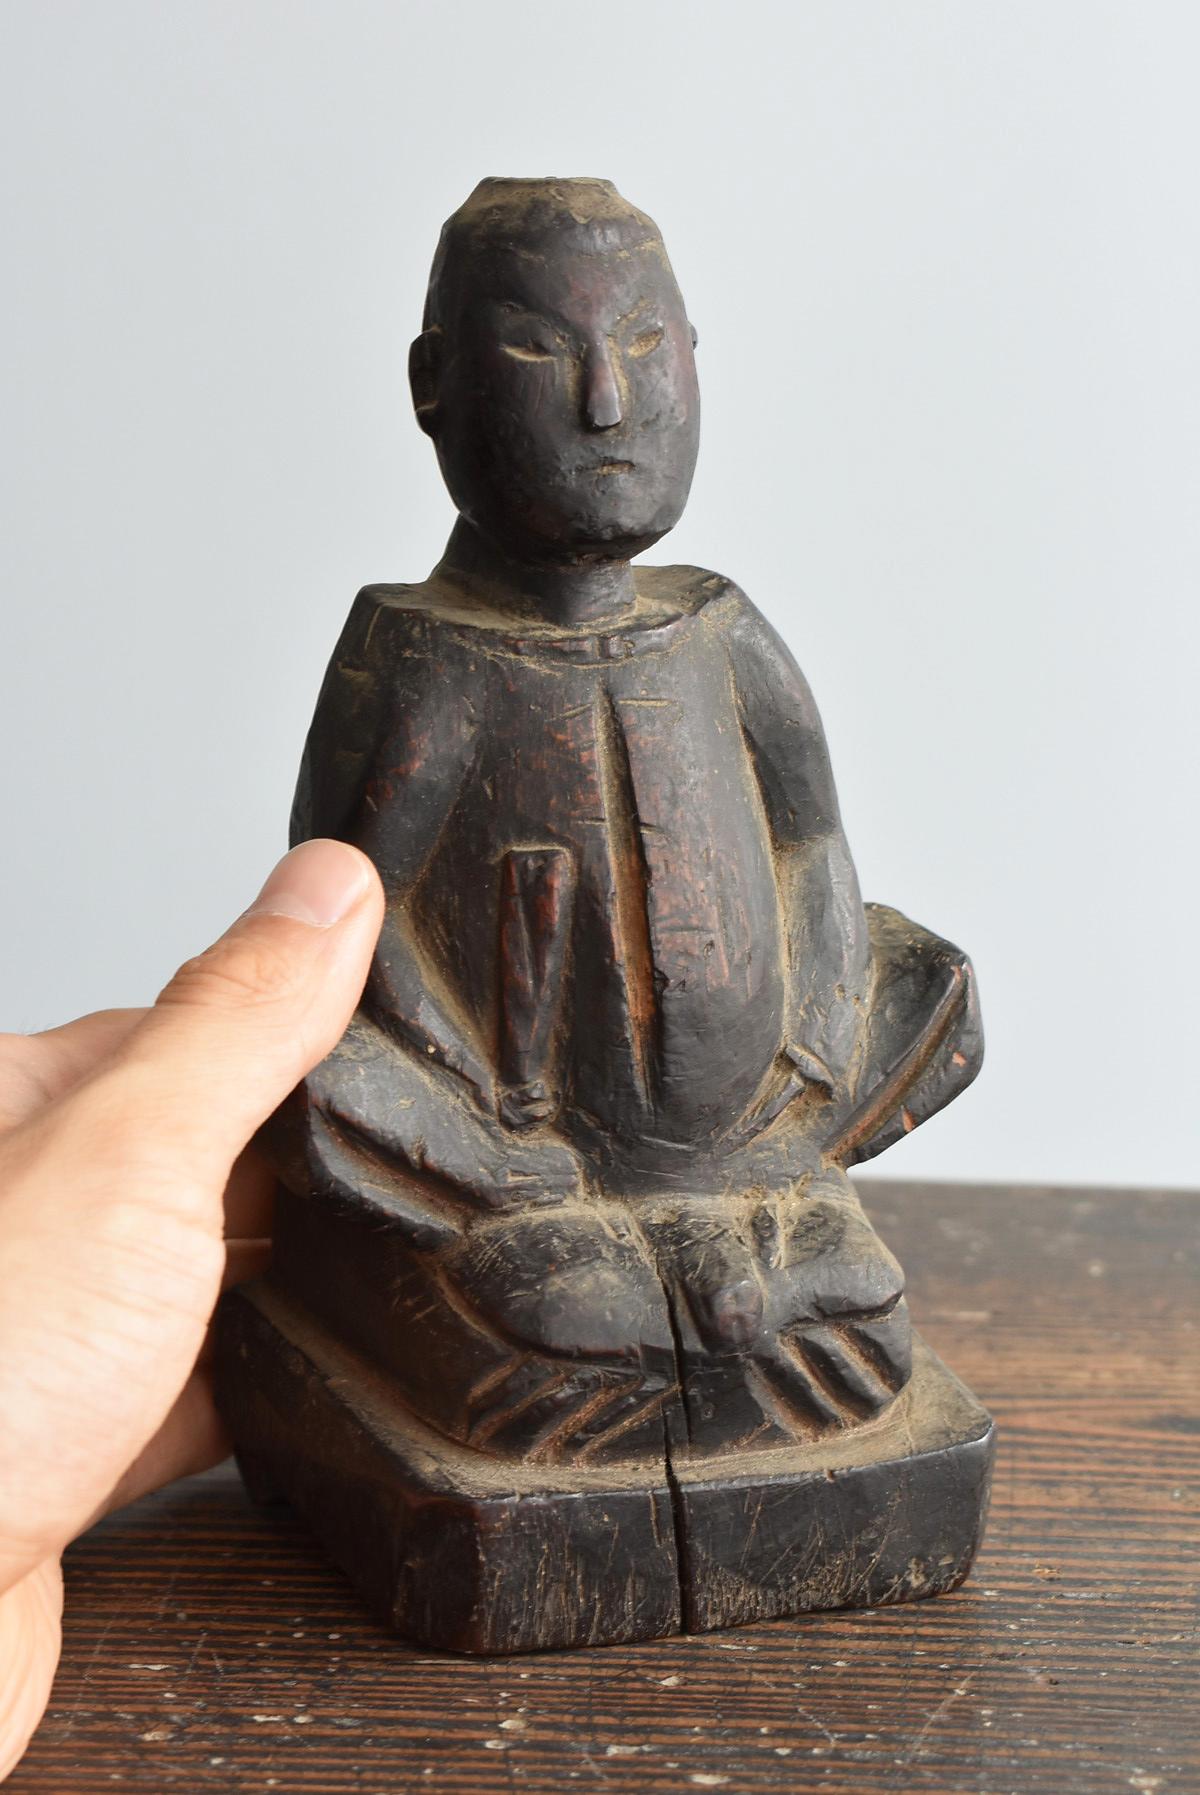 This is a wooden statue of a god made during the Edo and Meiji periods.
The name is 